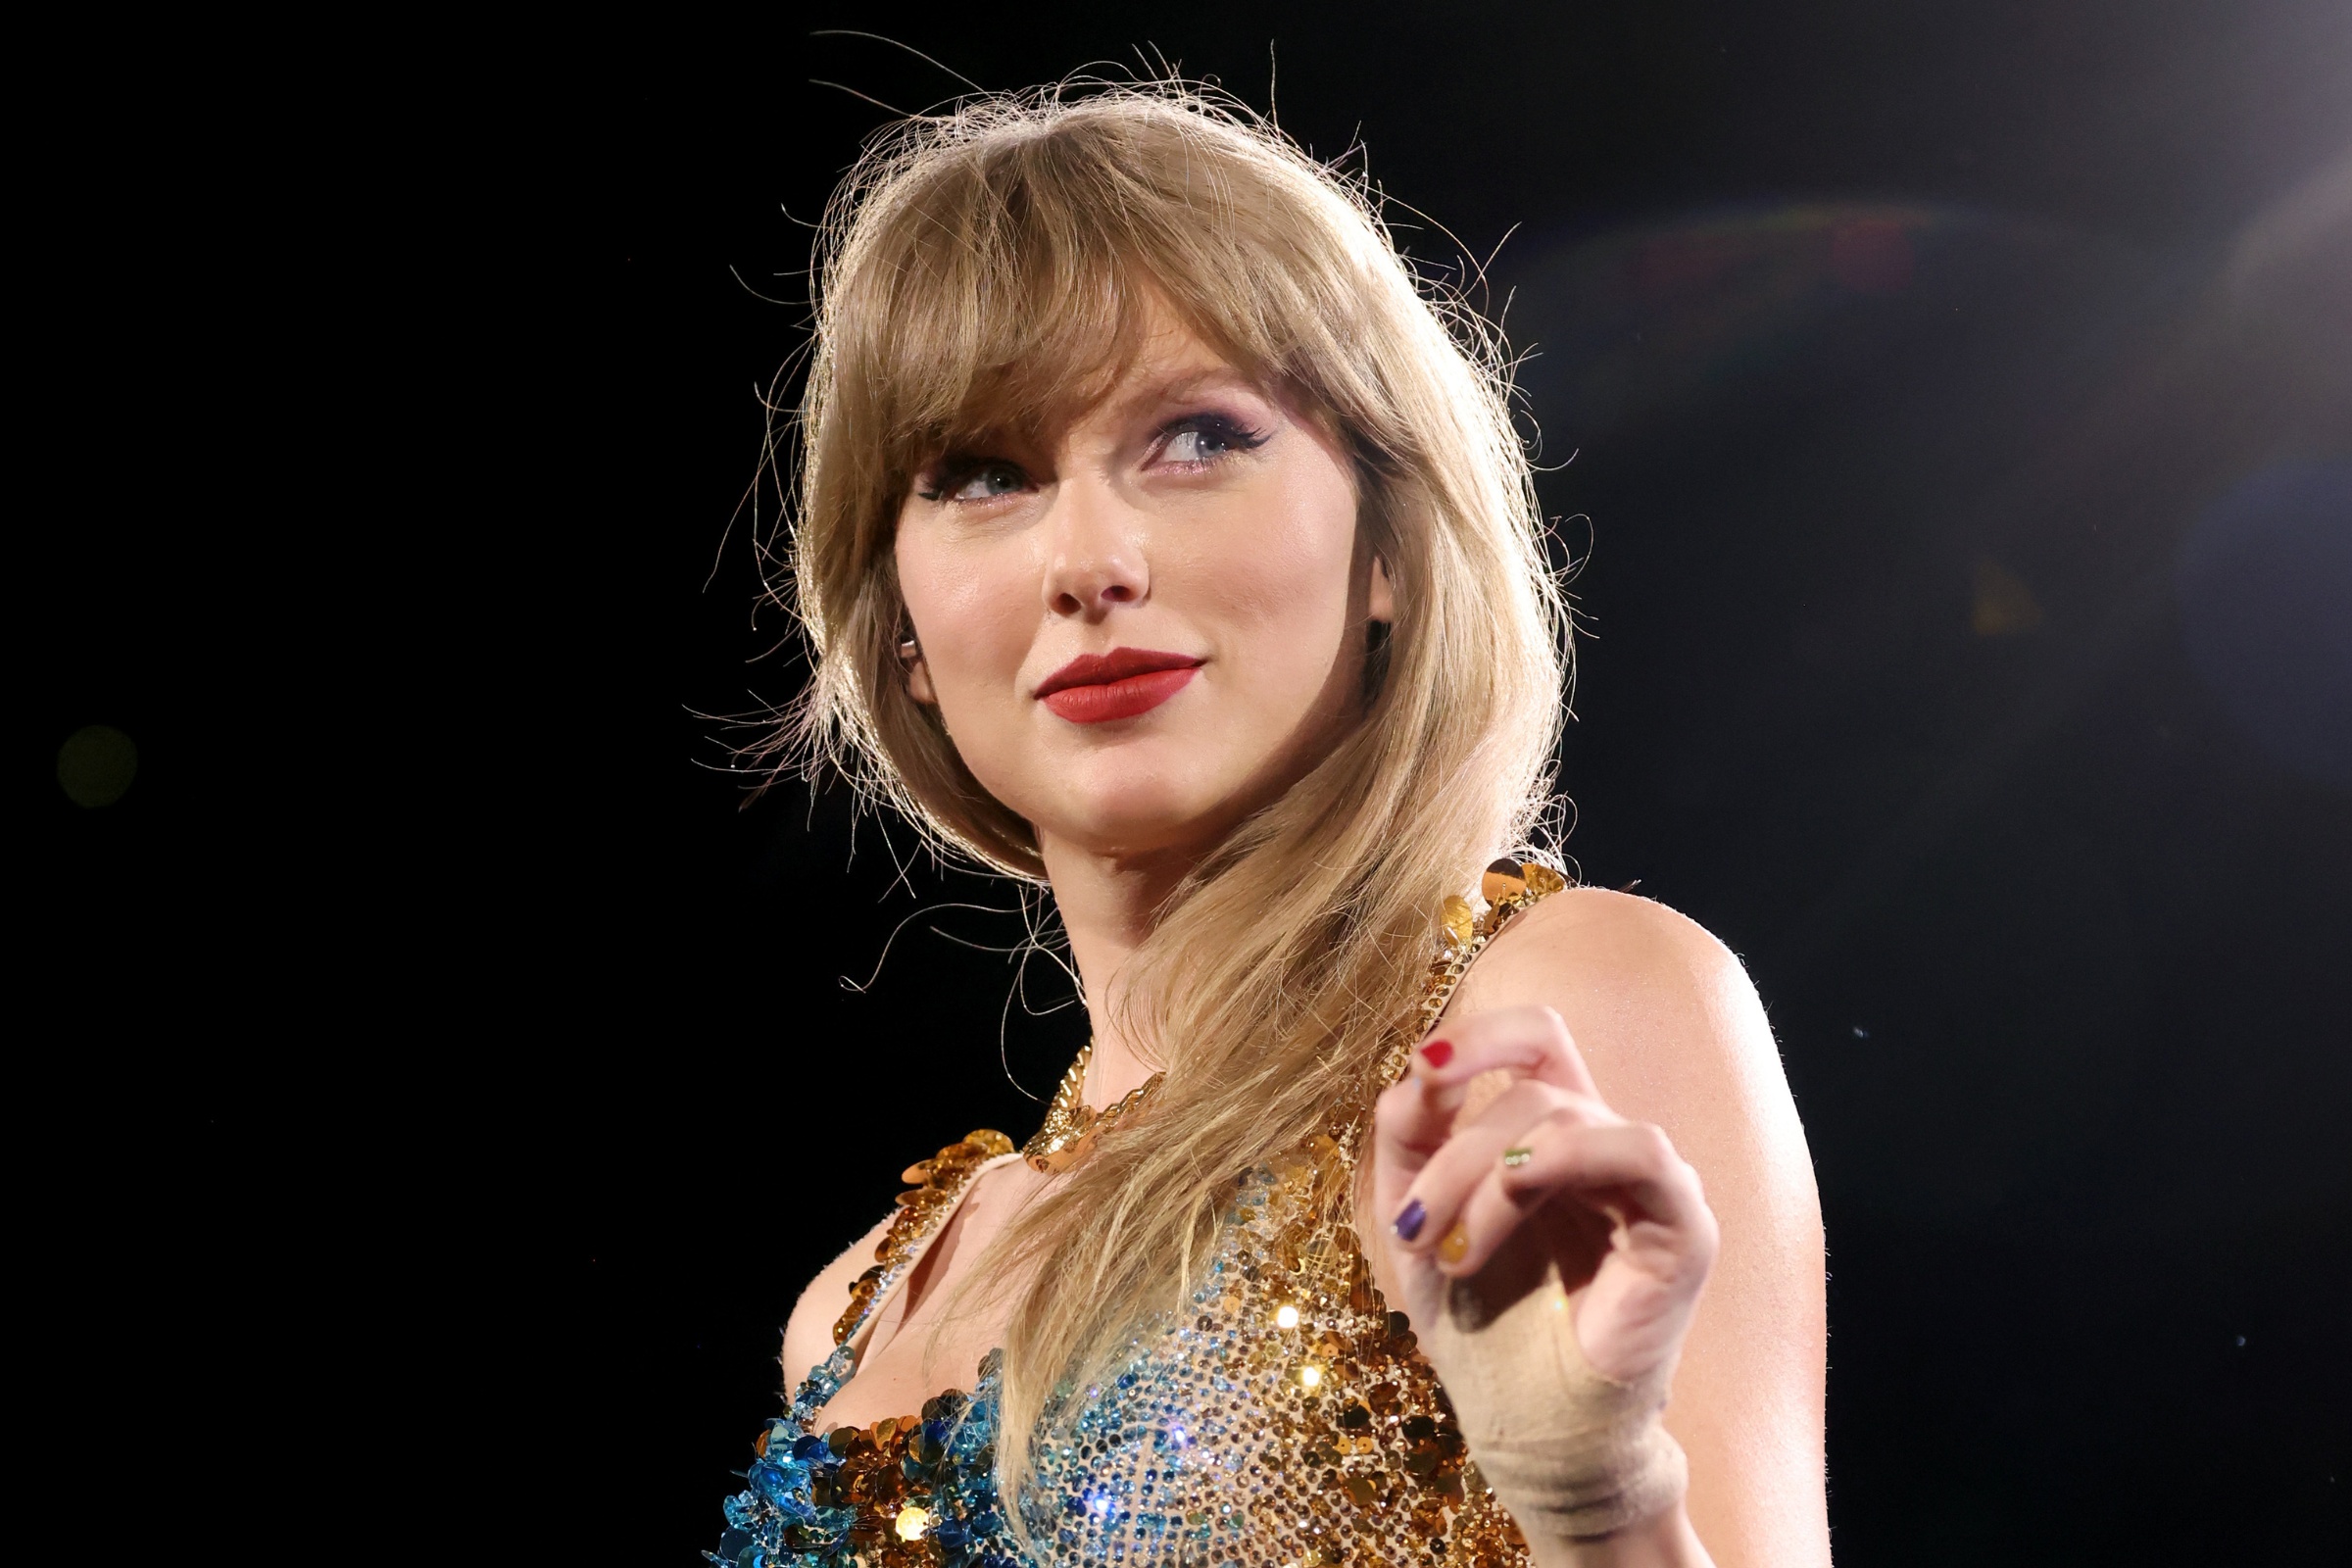 Taylor Swift's Piano Playing by Itself at Concert Sparks Conspiracy Theory